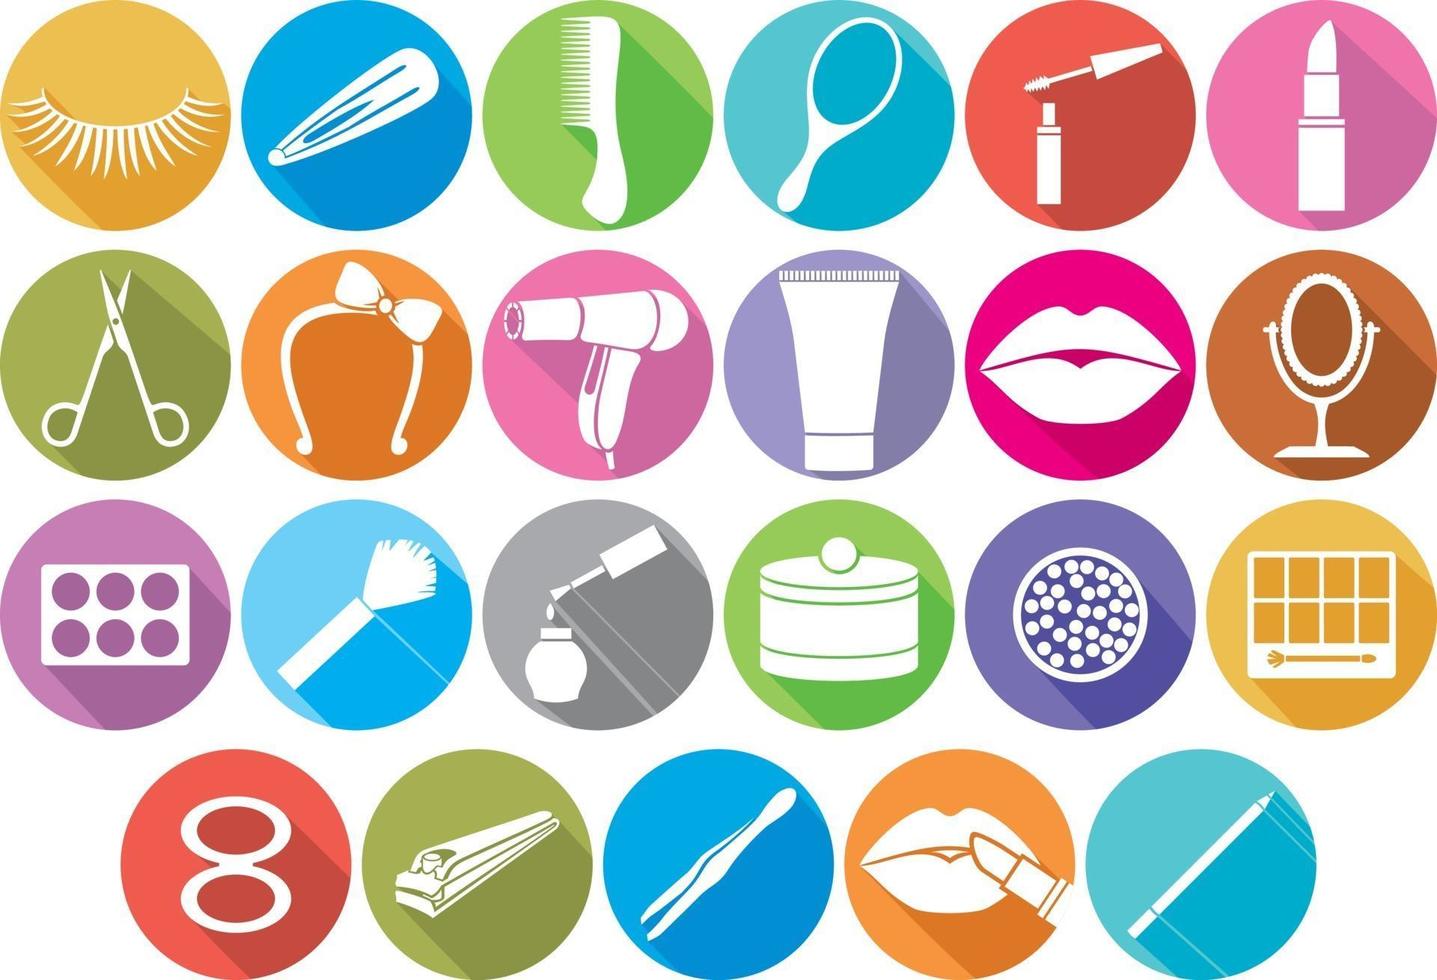 Make Up Flat Icons Collection vector